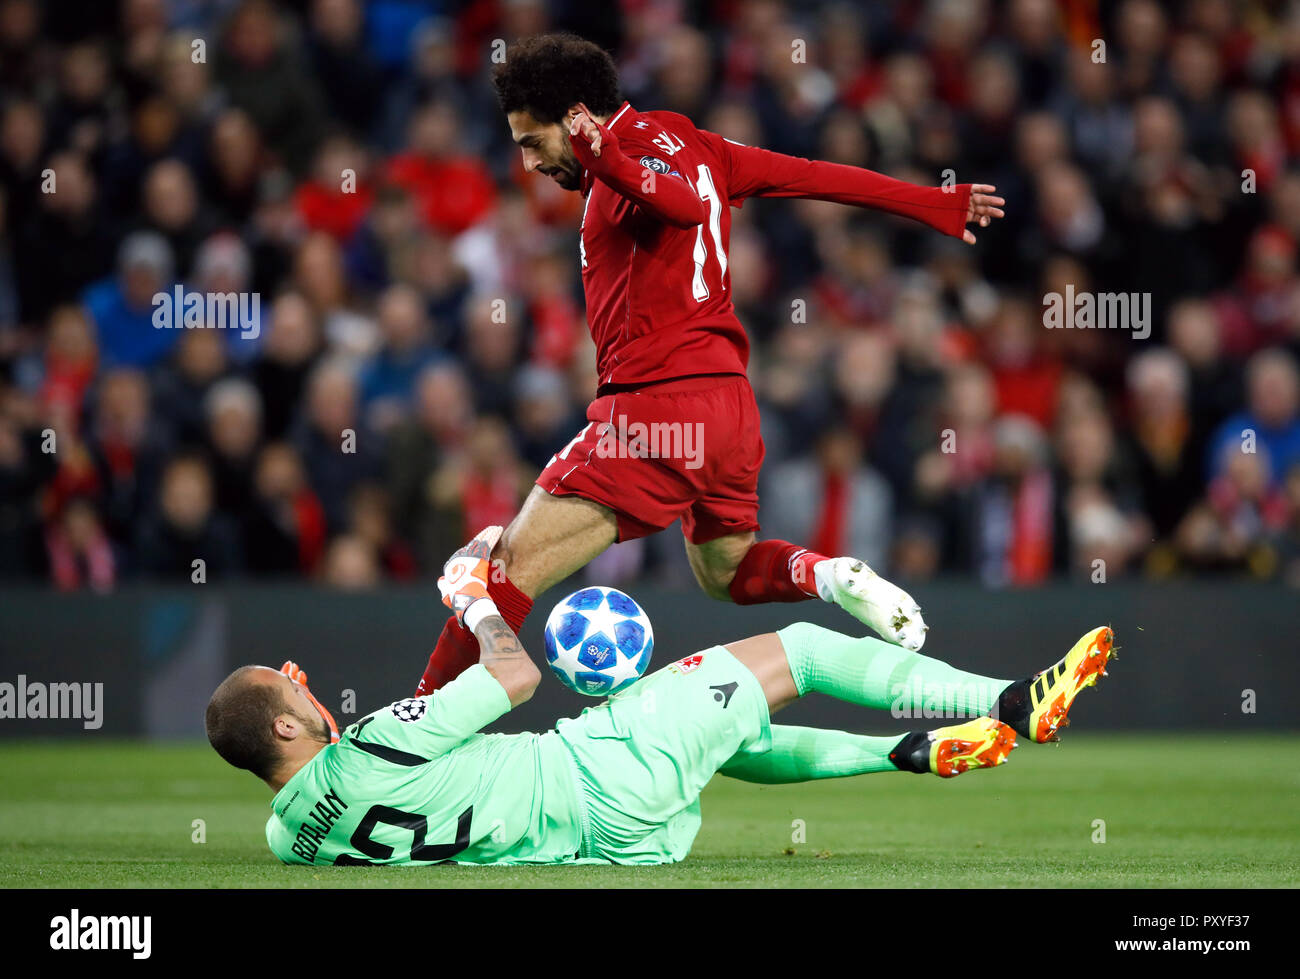 Red Star Belgrade's Milan Borjan saves from Liverpool's Mohamed Salah  during the UEFA Champions League, Group C match at Anfield, Liverpool Stock  Photo - Alamy